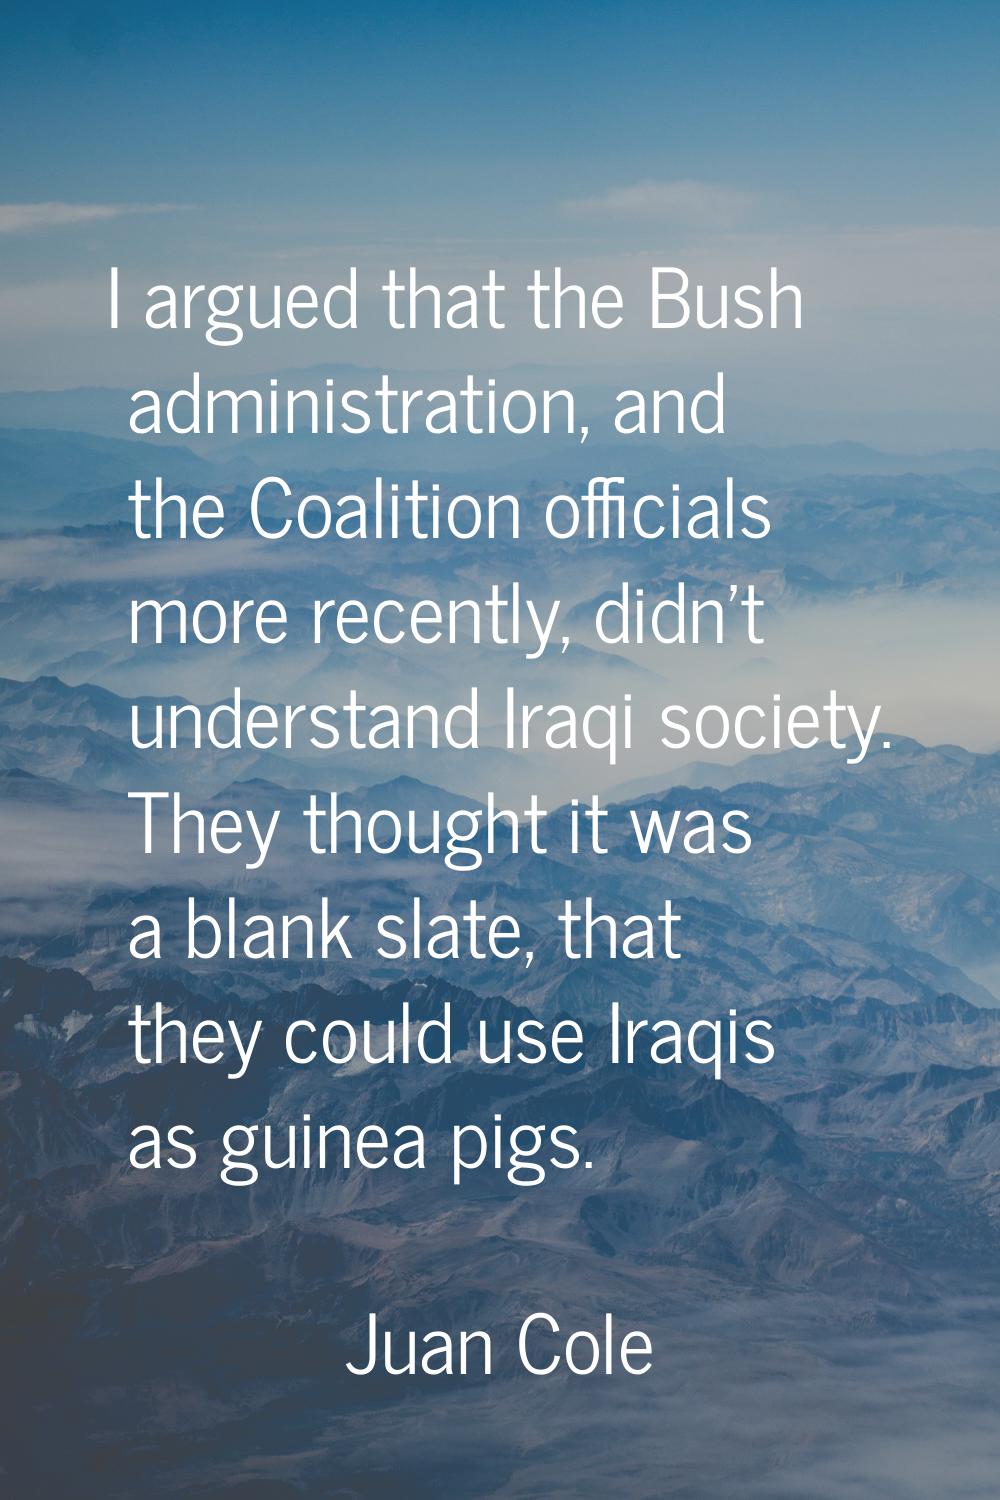 I argued that the Bush administration, and the Coalition officials more recently, didn't understand